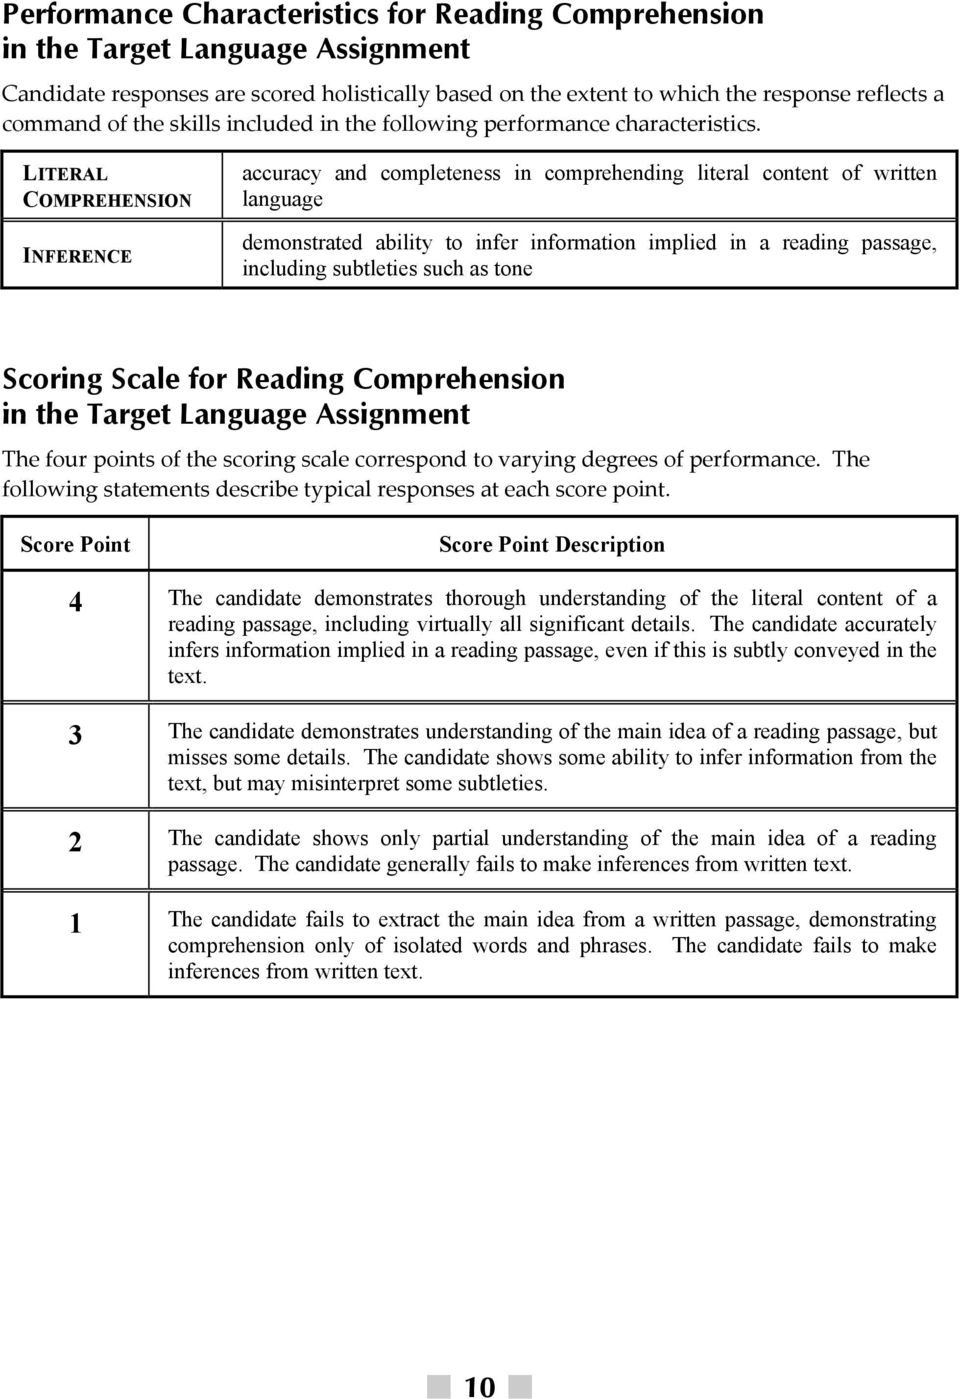 LITERAL COMPREHENSION INFERENCE accuracy and completeness in comprehending literal content of written language demonstrated ability to infer information implied in a reading passage, including